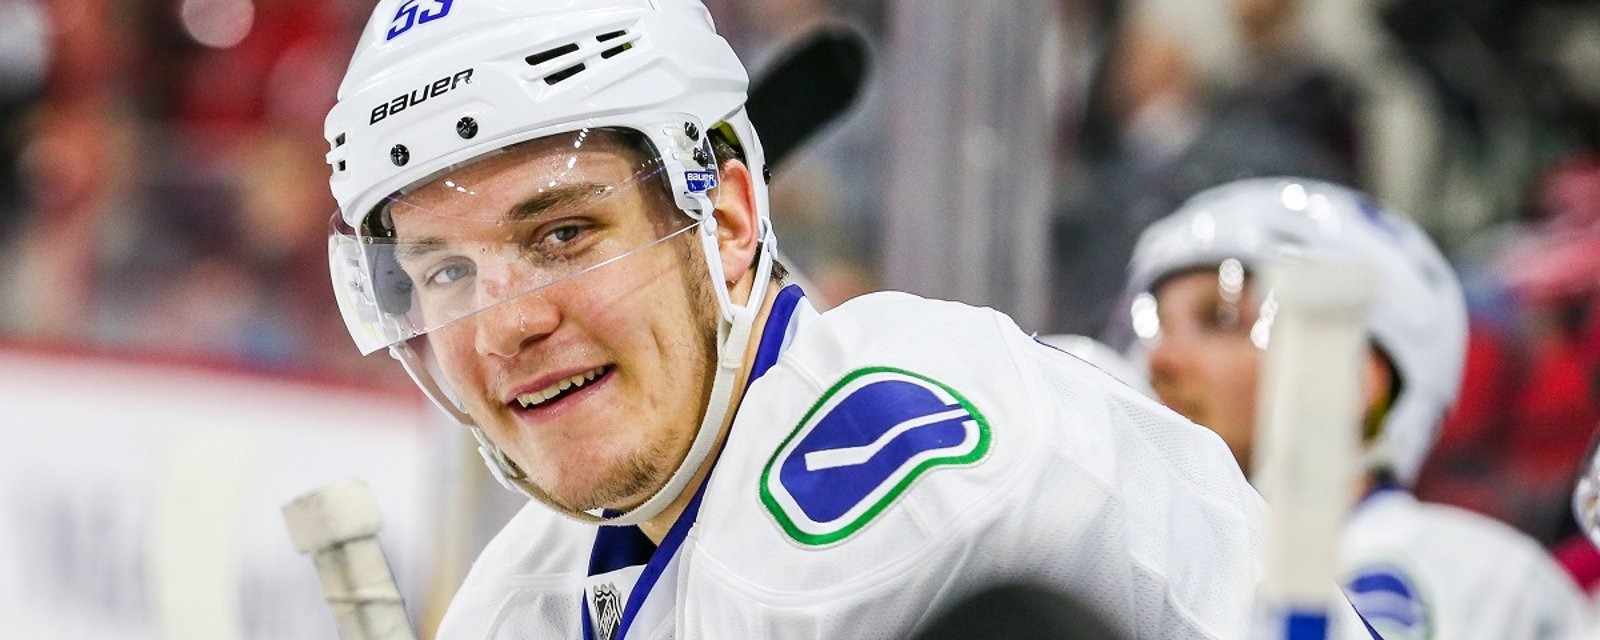 Breaking: Conflicting reports of a deal for Canucks star Bo Horvat.